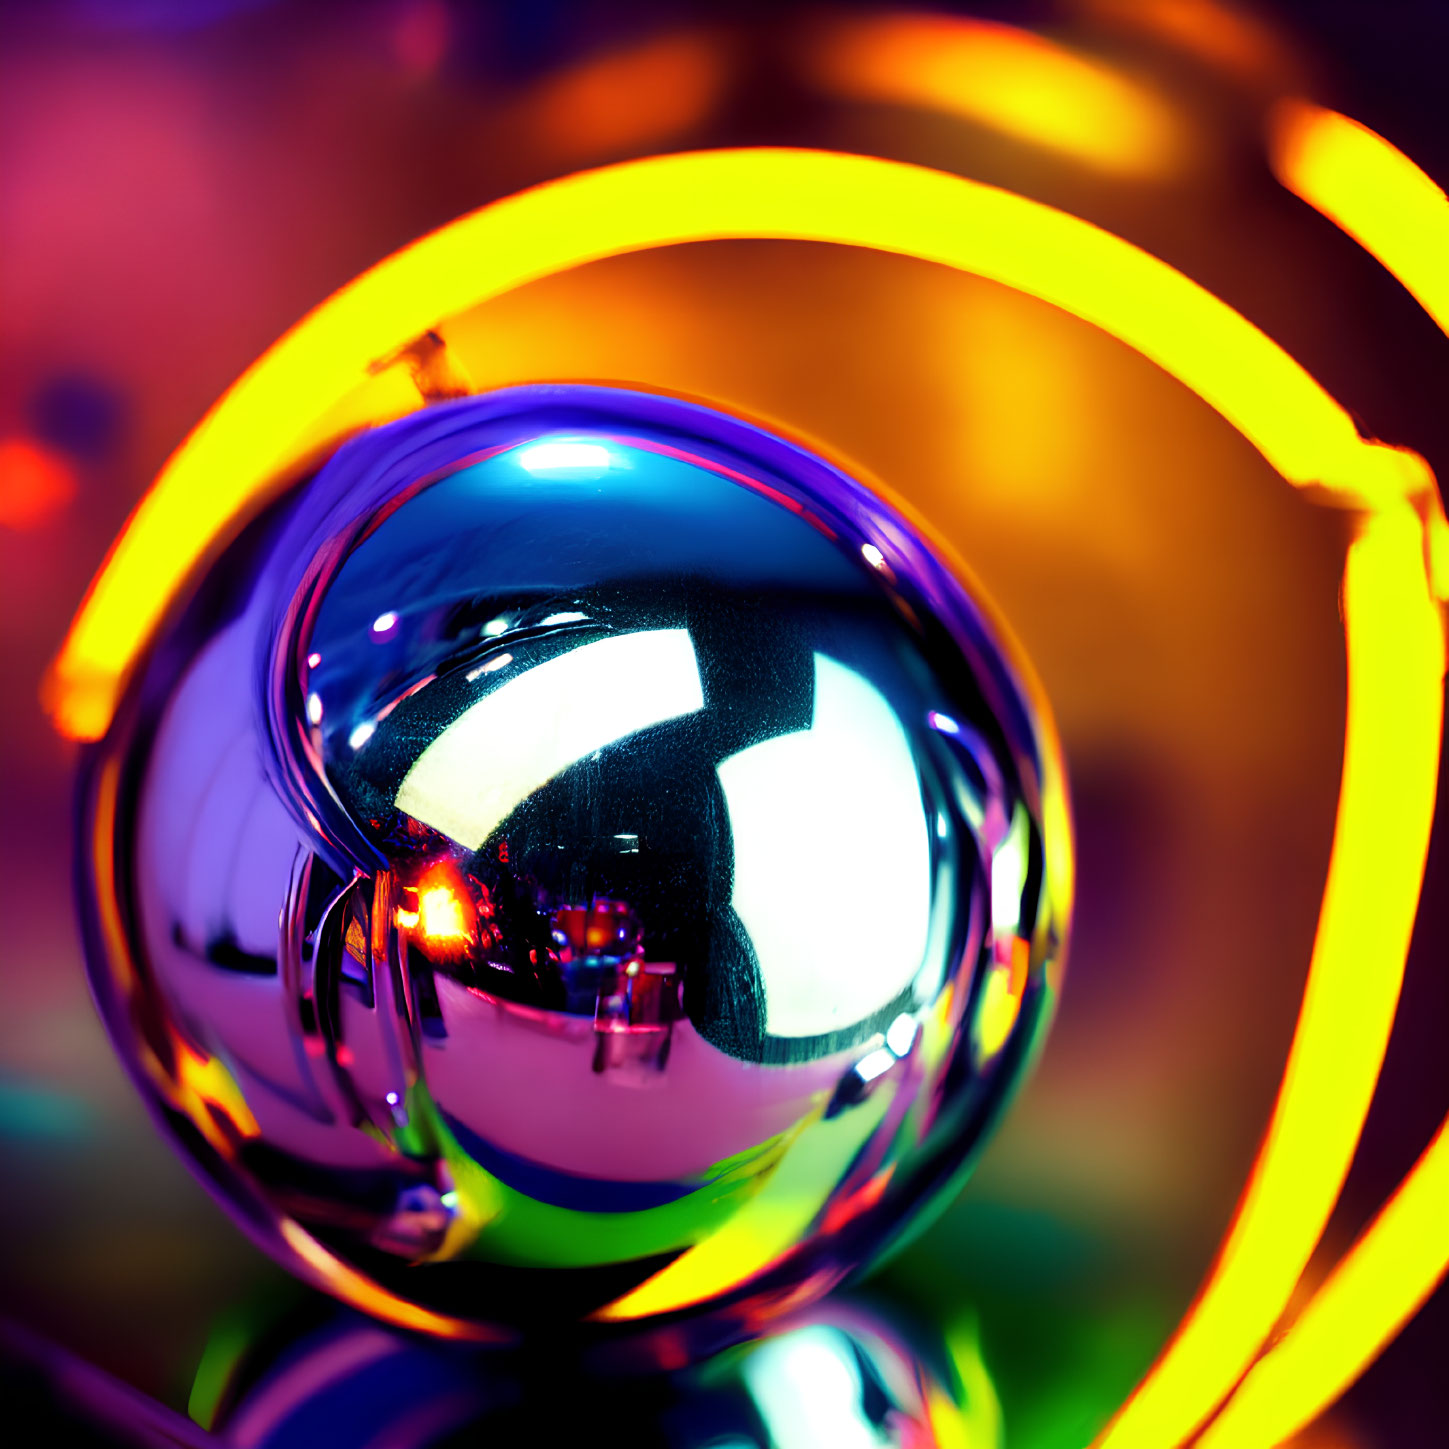 Reflective glass sphere against vibrant purple, blue, and orange background